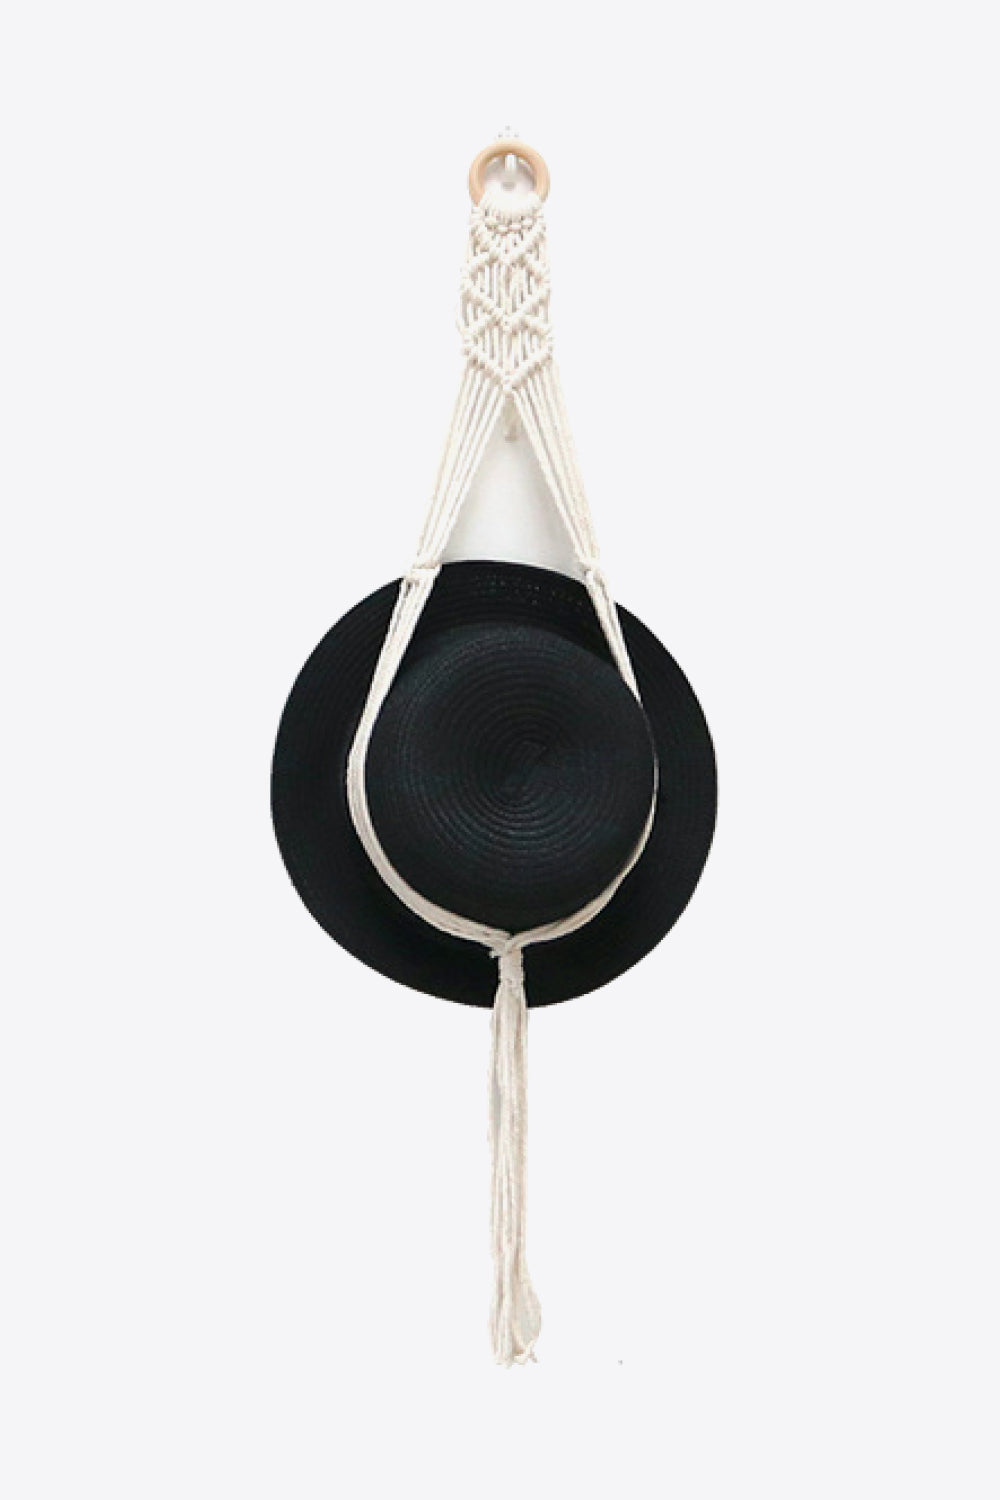 Macrame Hat Hanger Print on any thing USA/STOD clothes